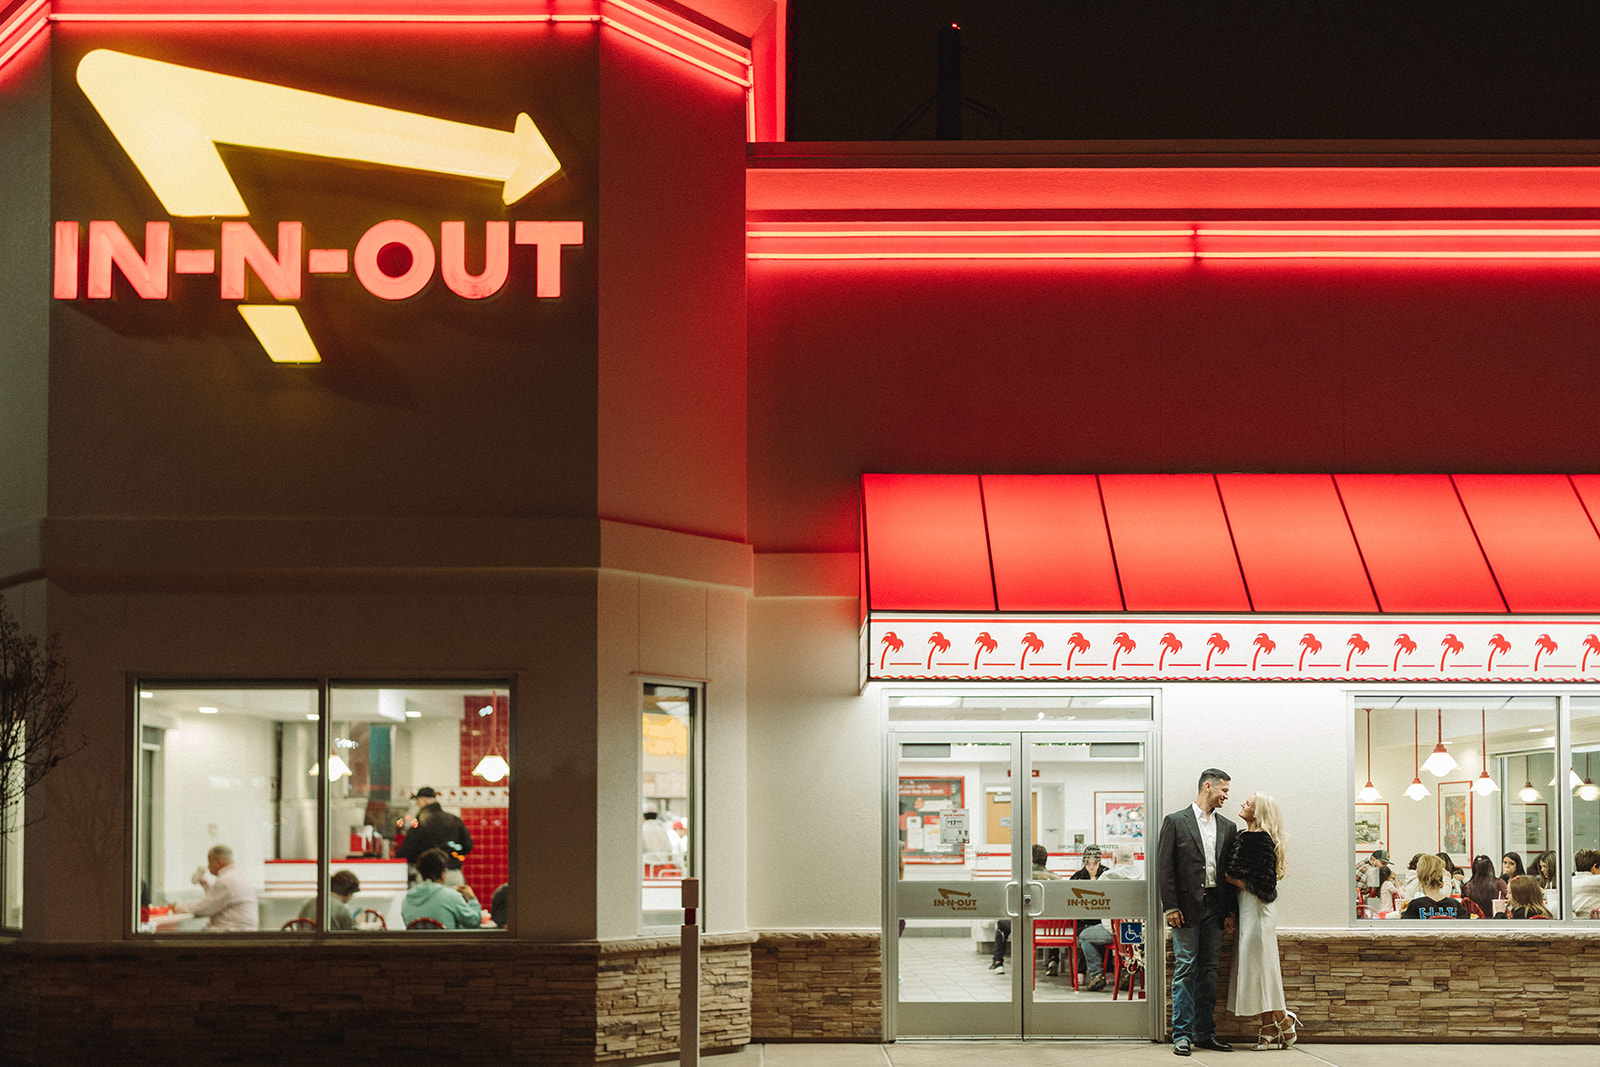 engagement-grapevine-in-n-out